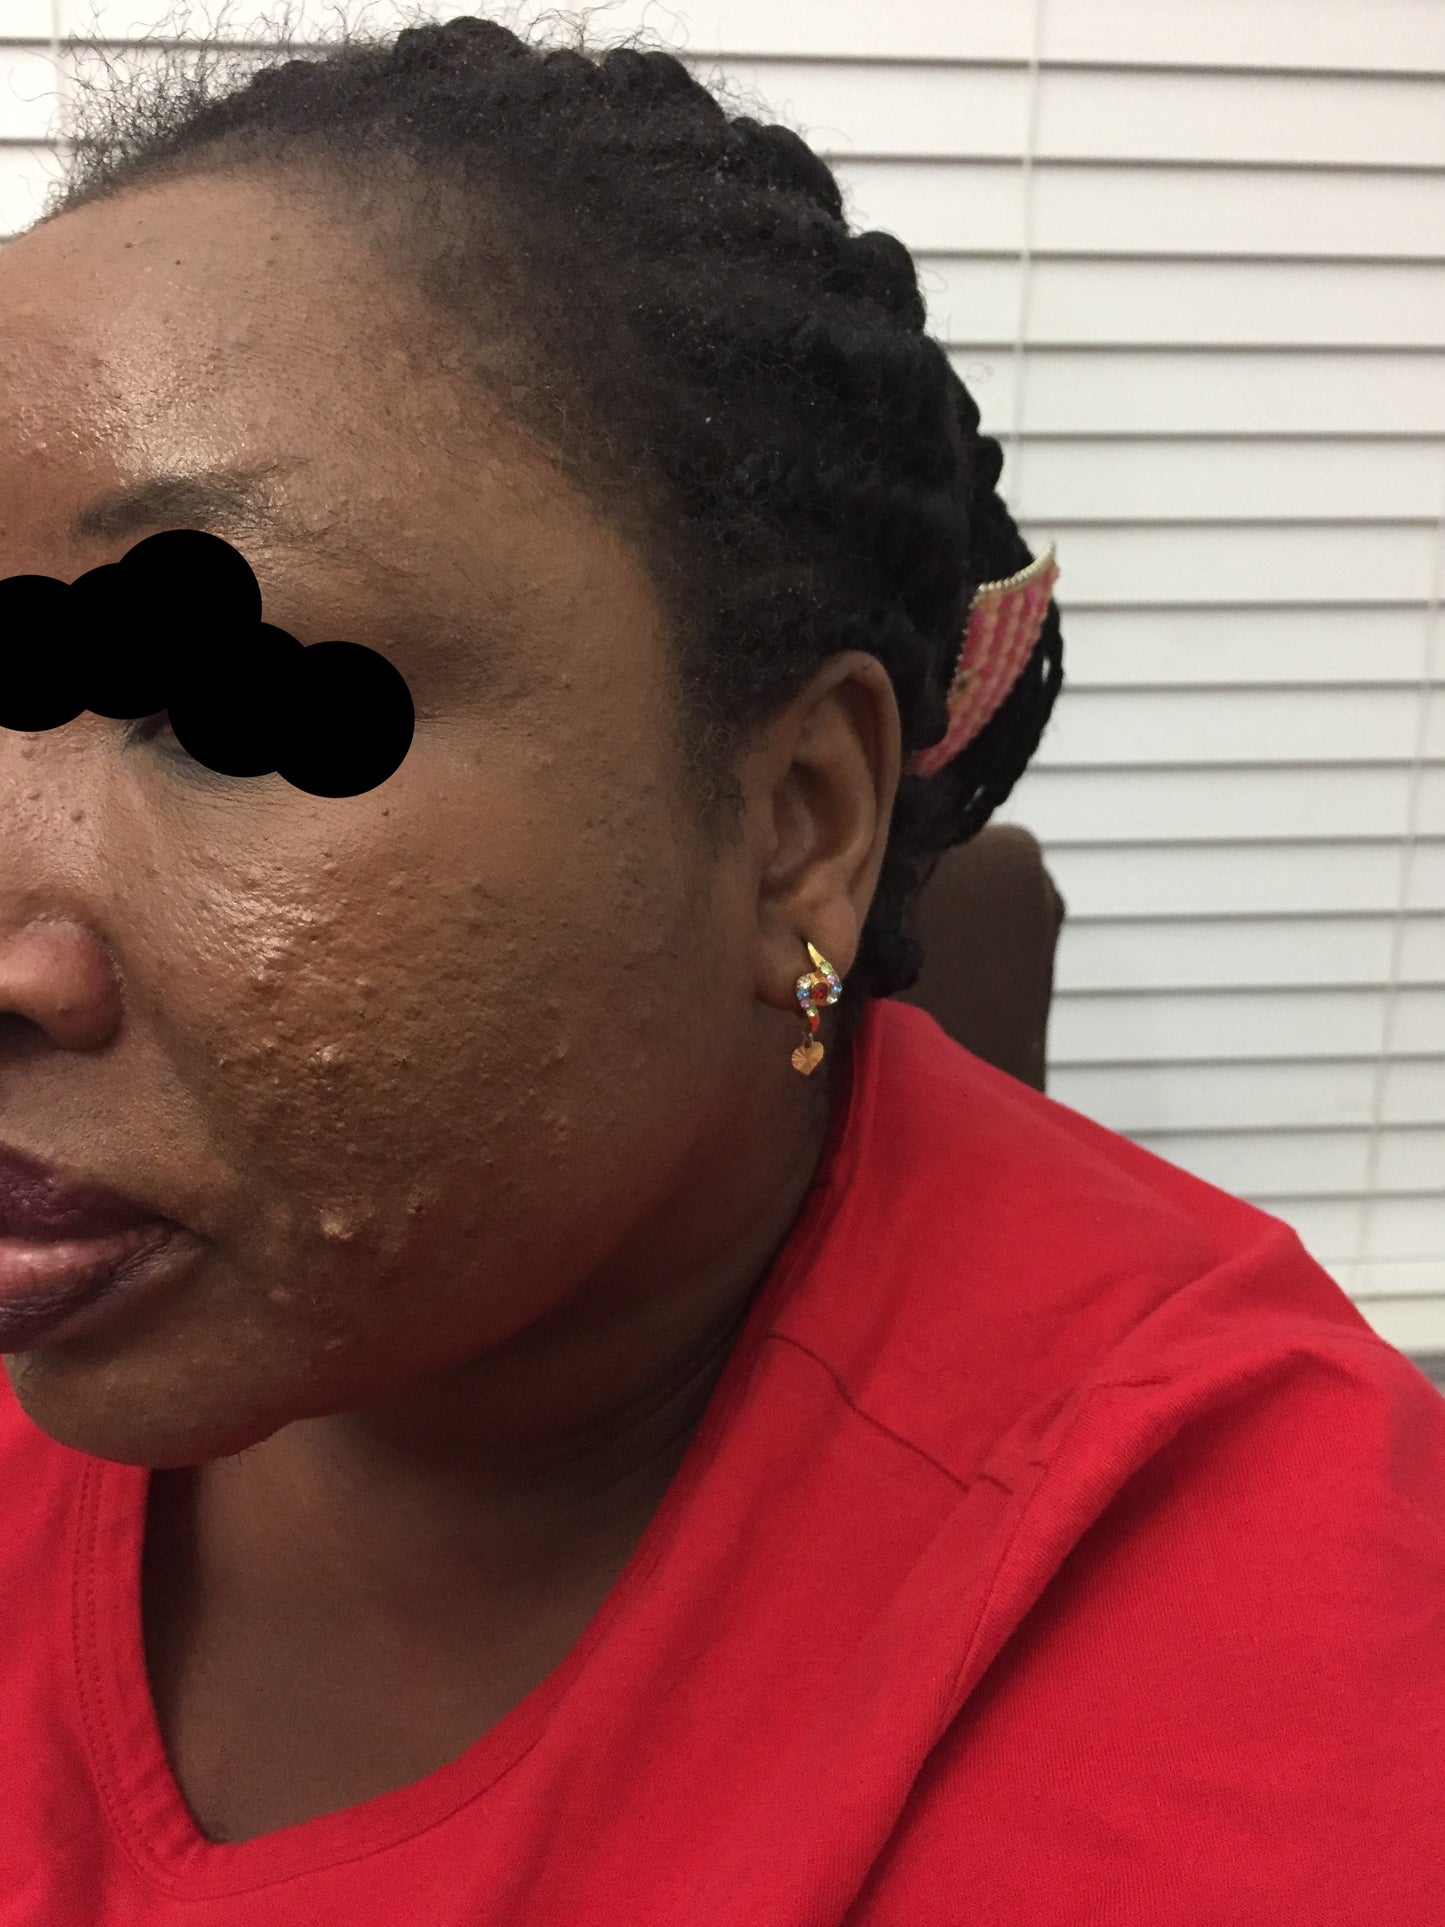 before and after pictures of severe acne